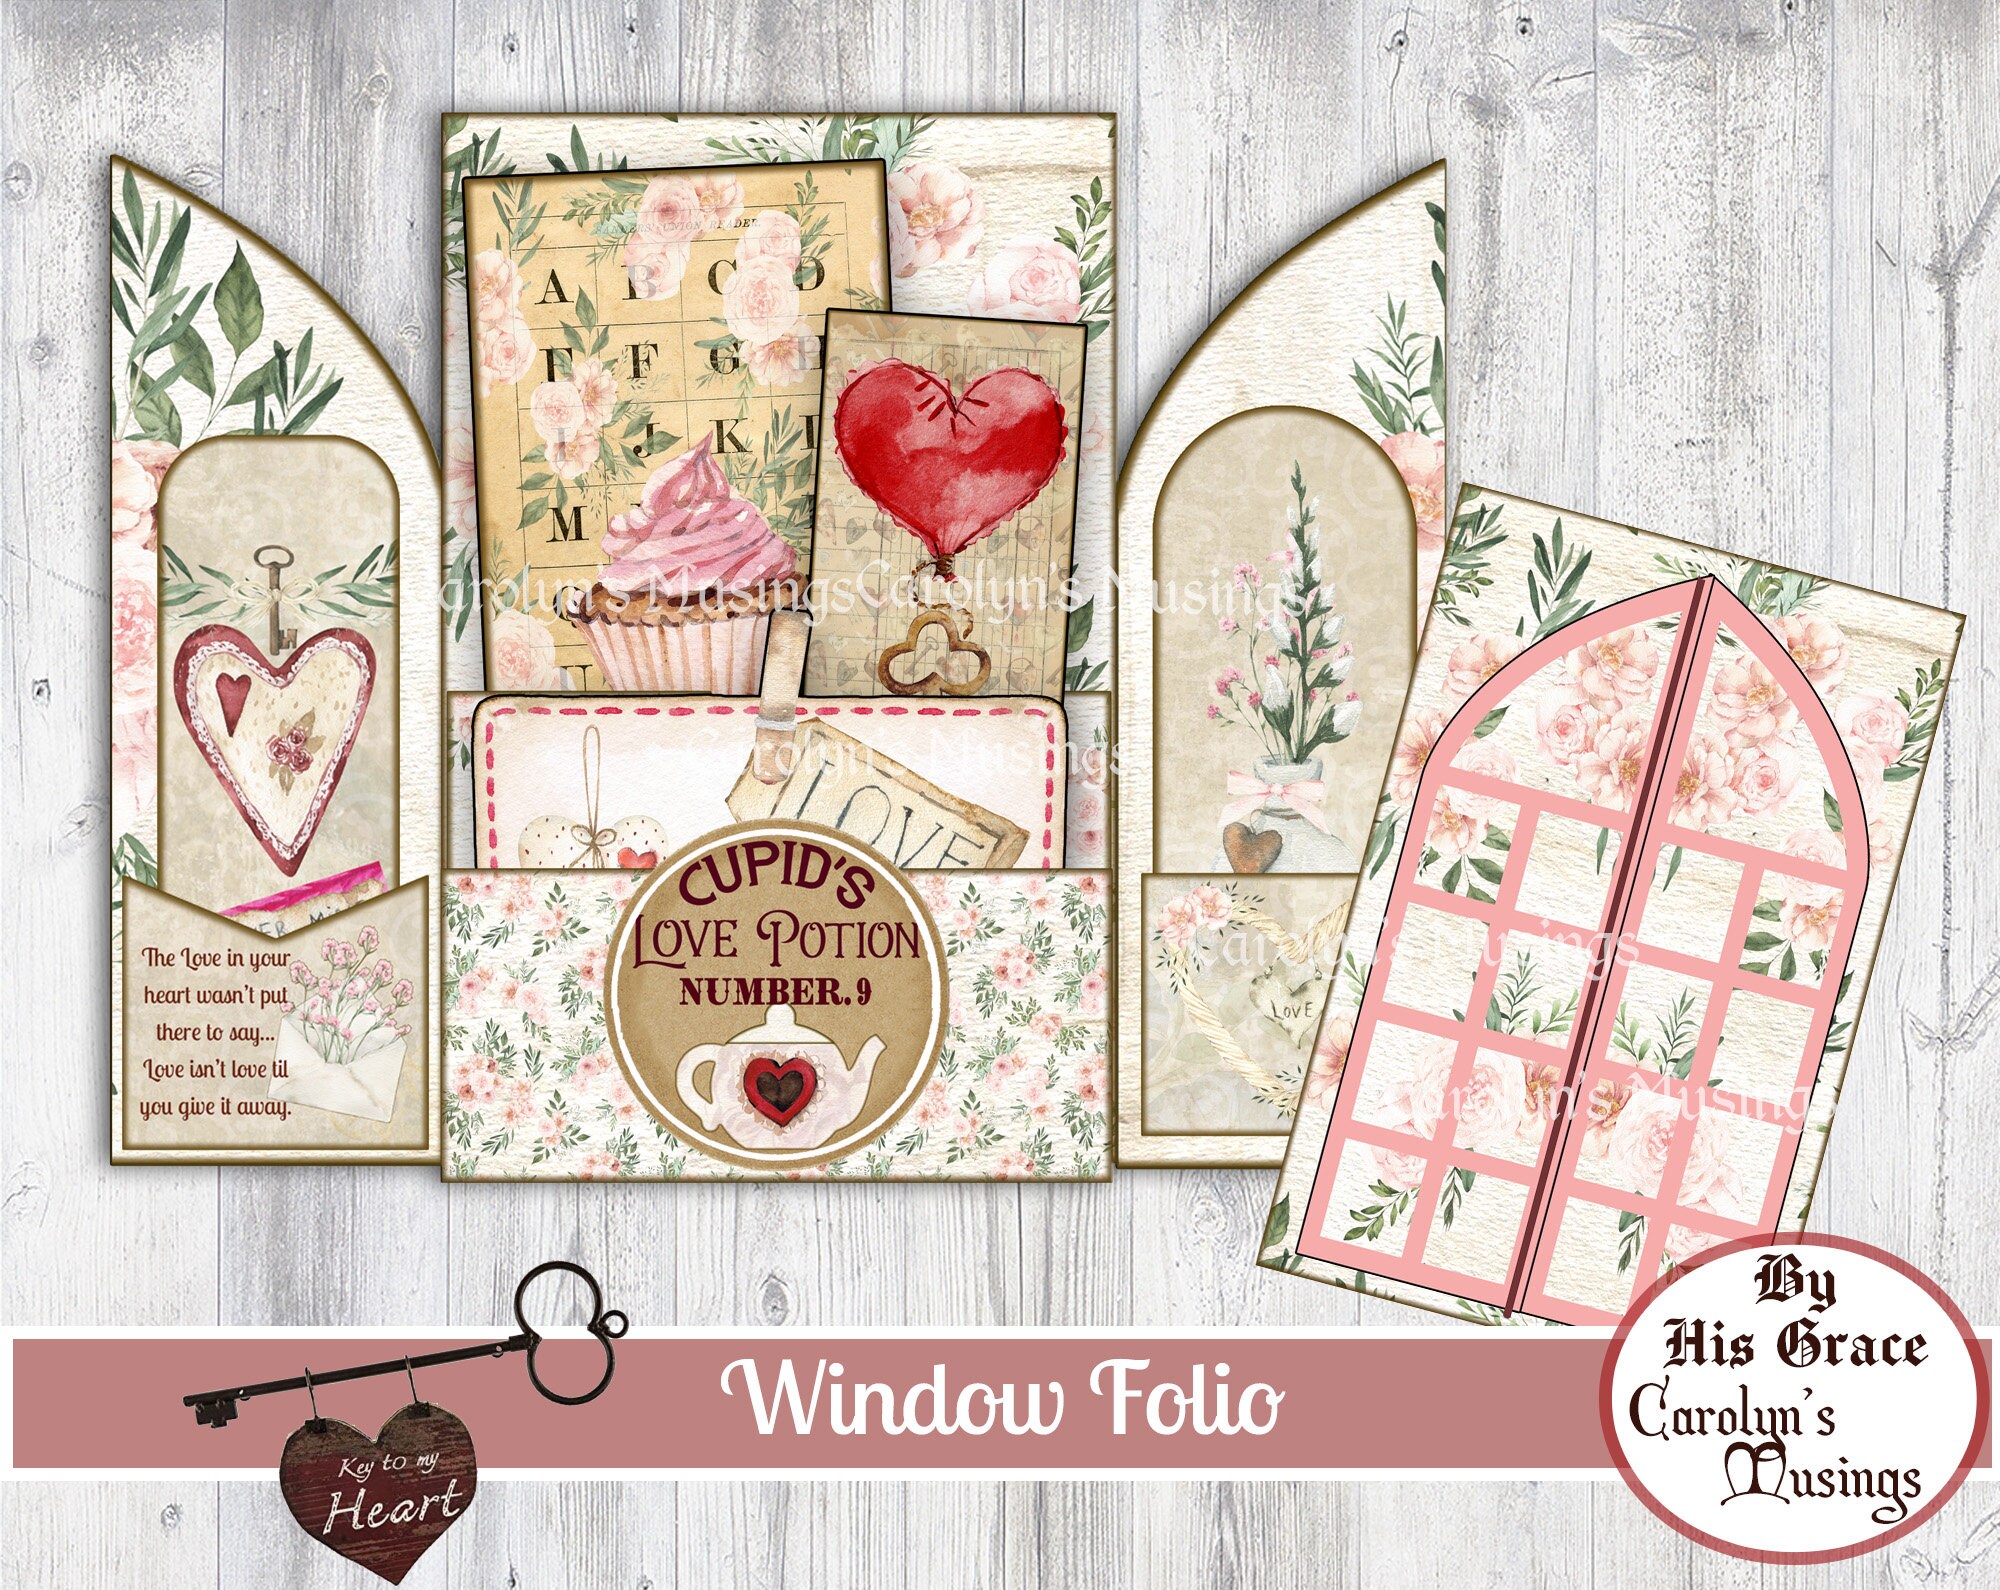 Valentine's Day digital paper love scrapbook paper valentine pattern hearts  printable paper bird owl cupid background commercial use D771